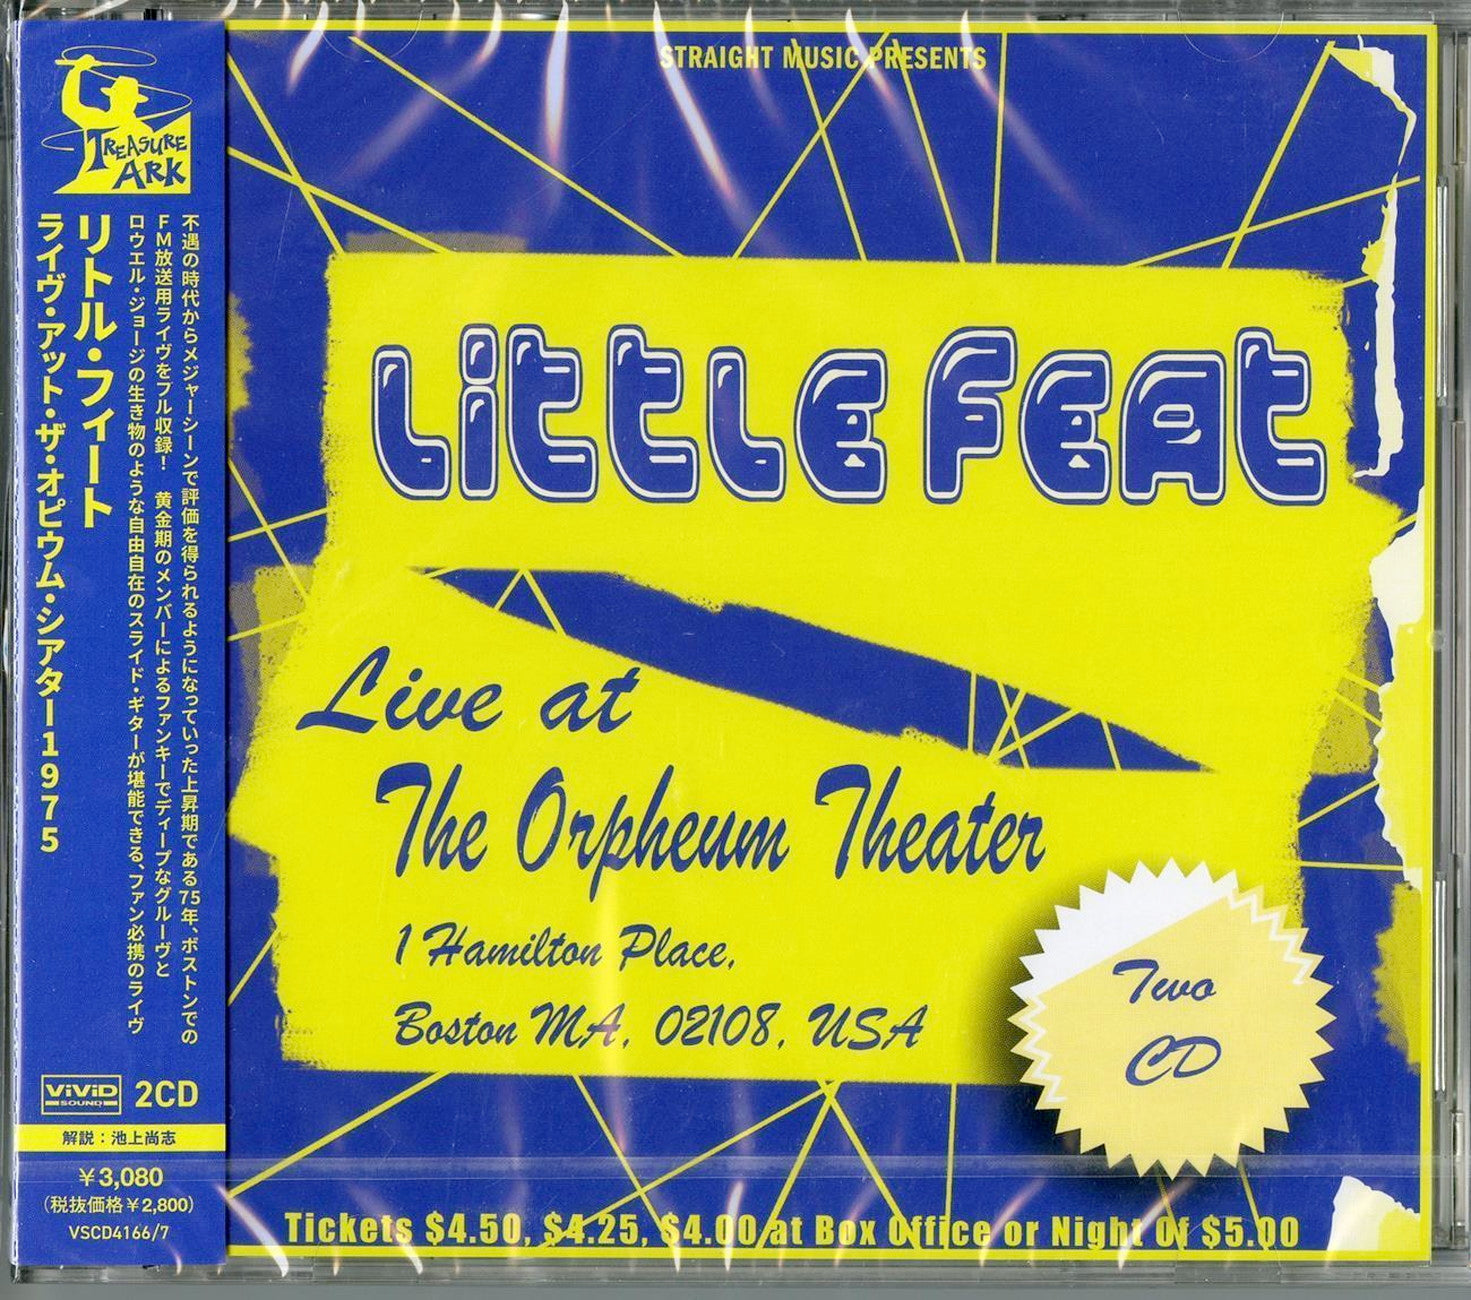 Little Feat - Live At The Orpheum Theater. Boston 1975 - Import 2 CD – CDs Vinyl Japan Store